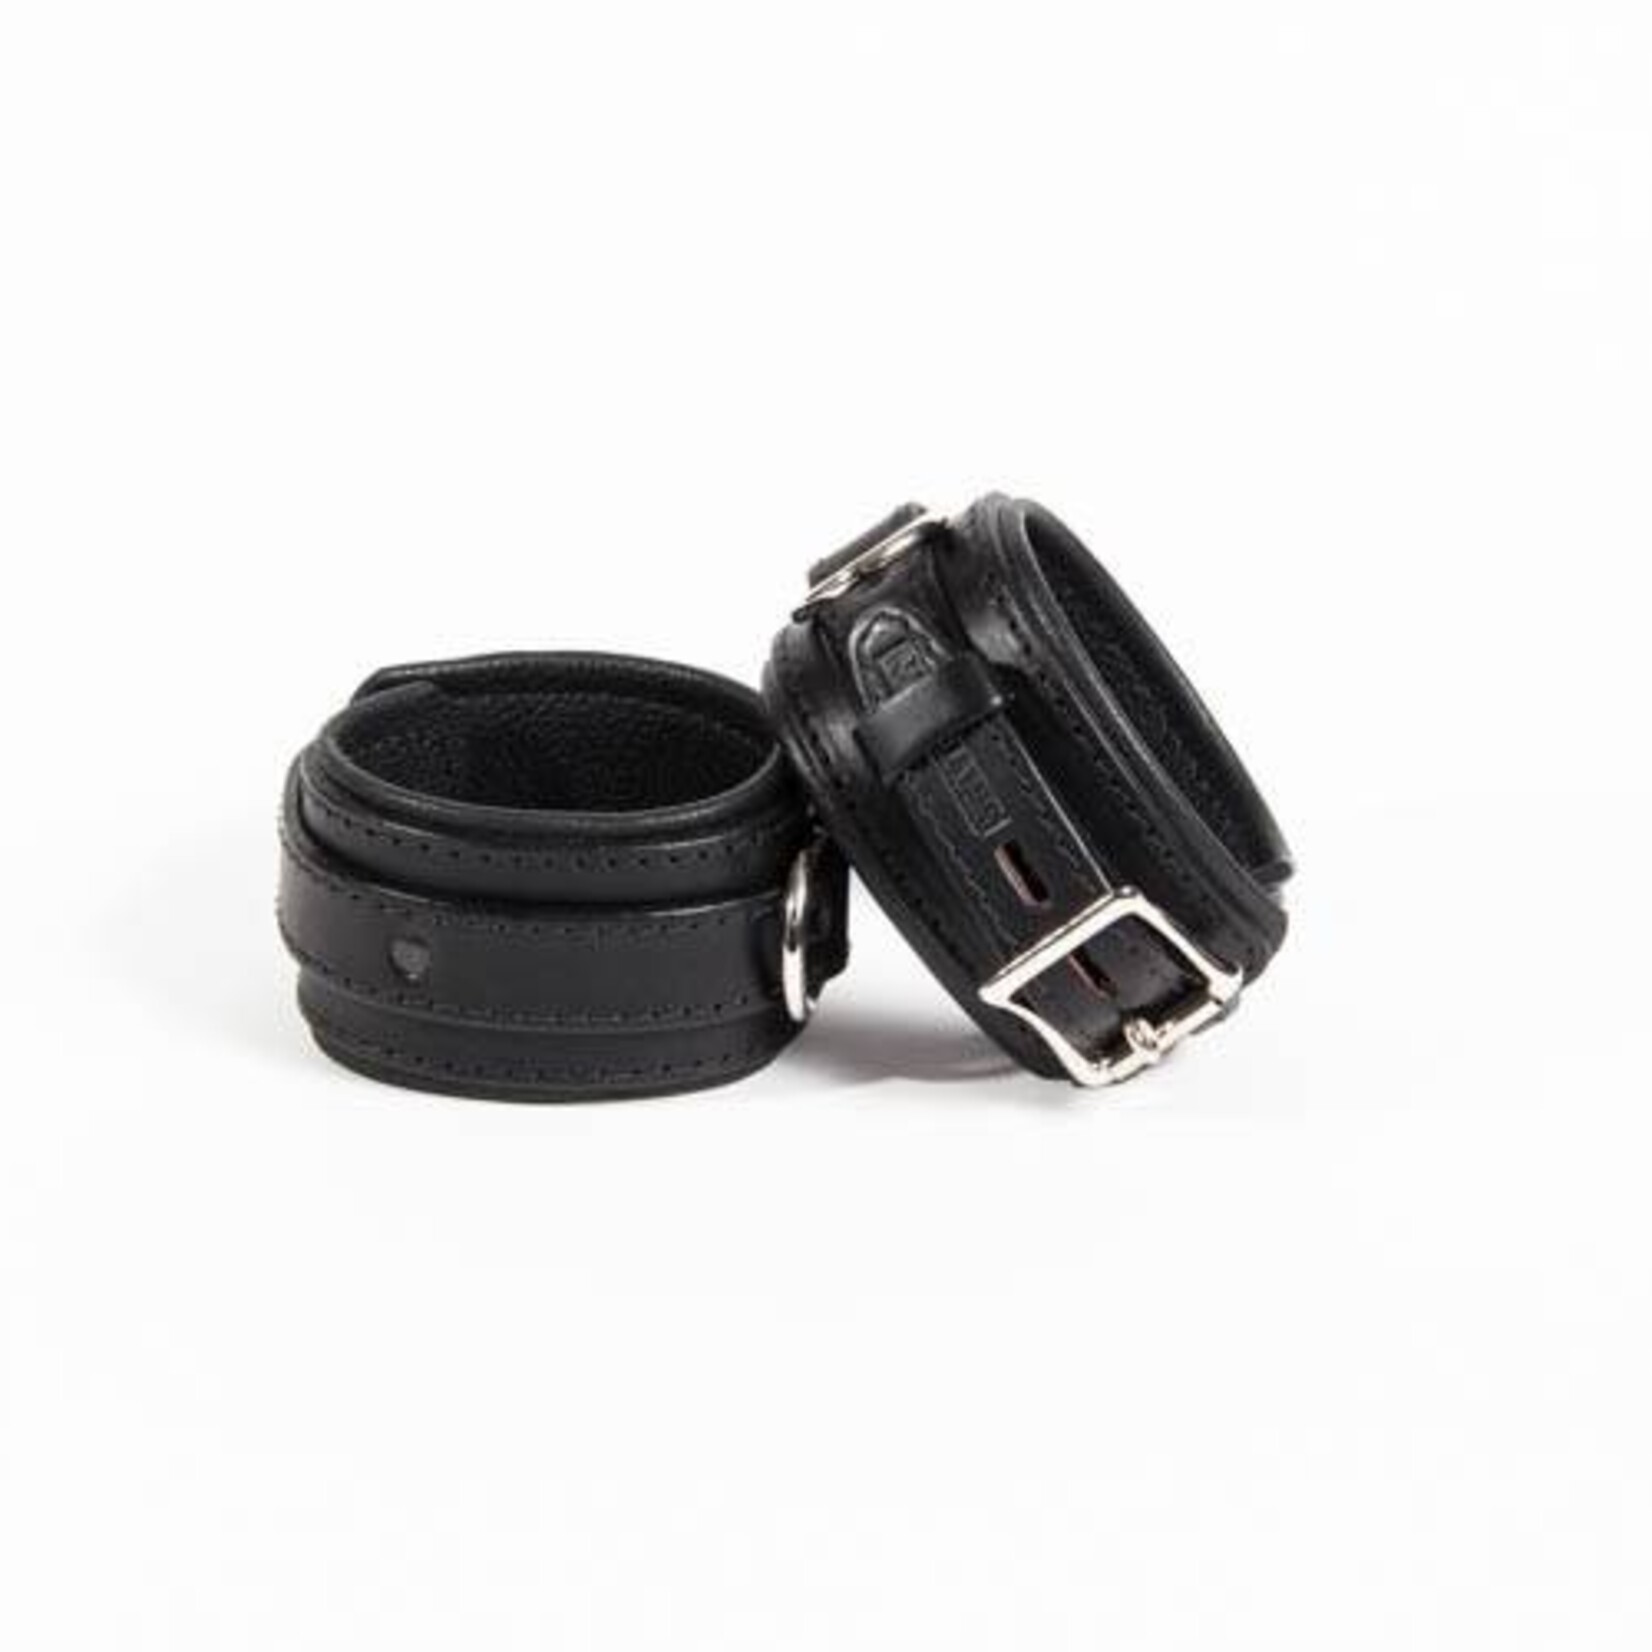 Sinvention Classic Deluxe Leather Cuffs - Medium